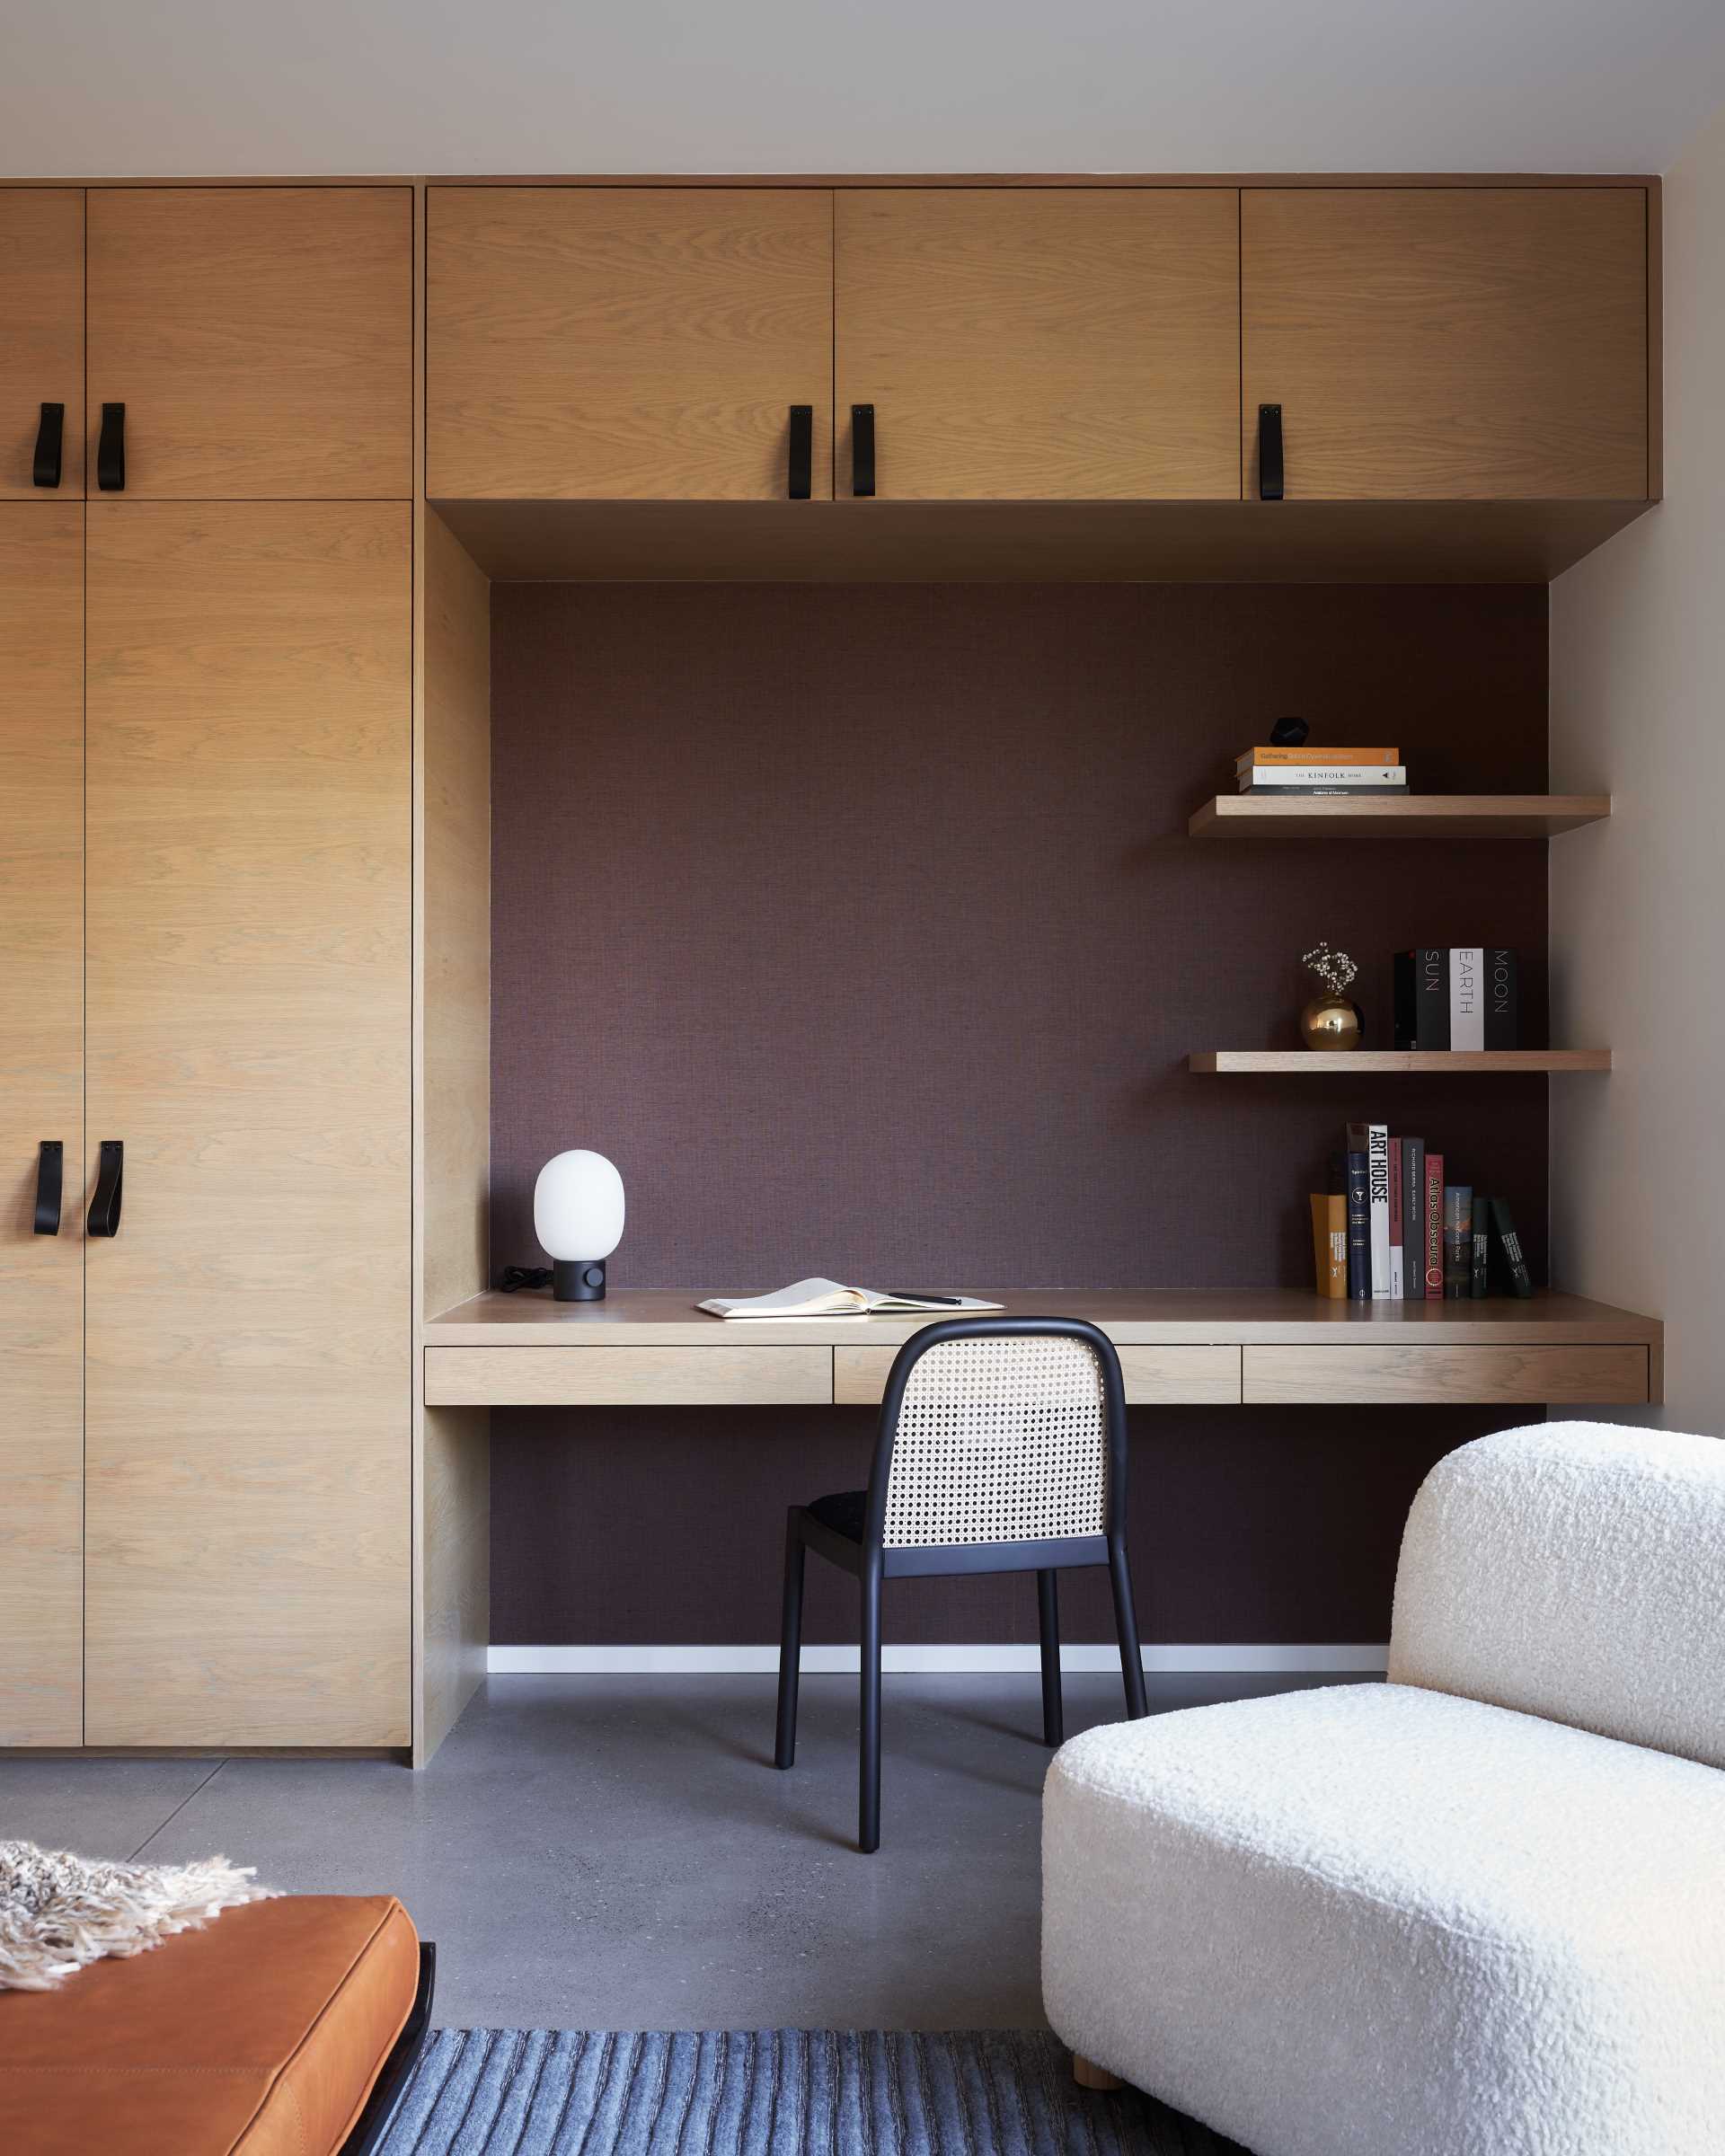 A wall of cabinetry with leather pulls, includes a floating desk and matching shelves.